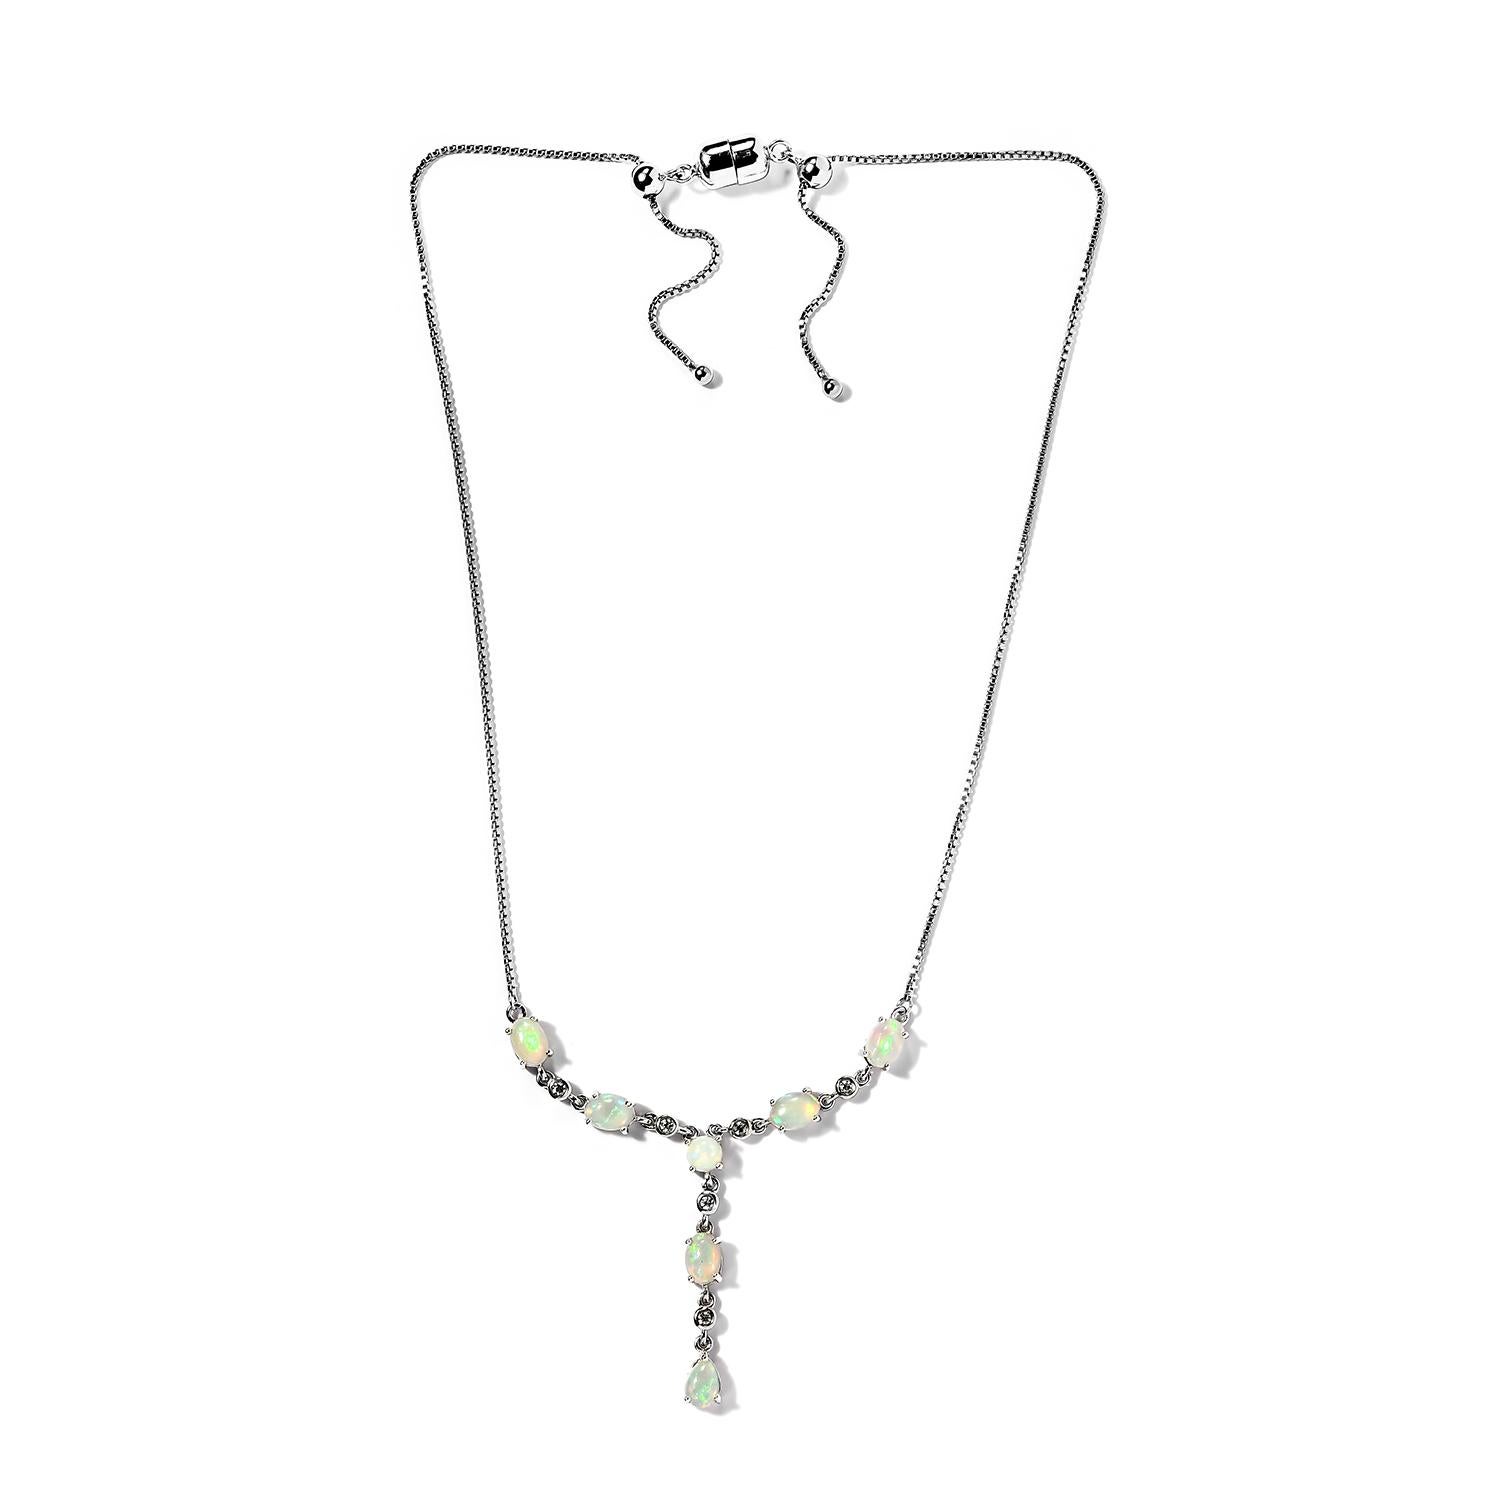 Art Deco Ethiopian Opal Necklace in 925 Sterling Silver Birthstone anniversary necklace For Sale